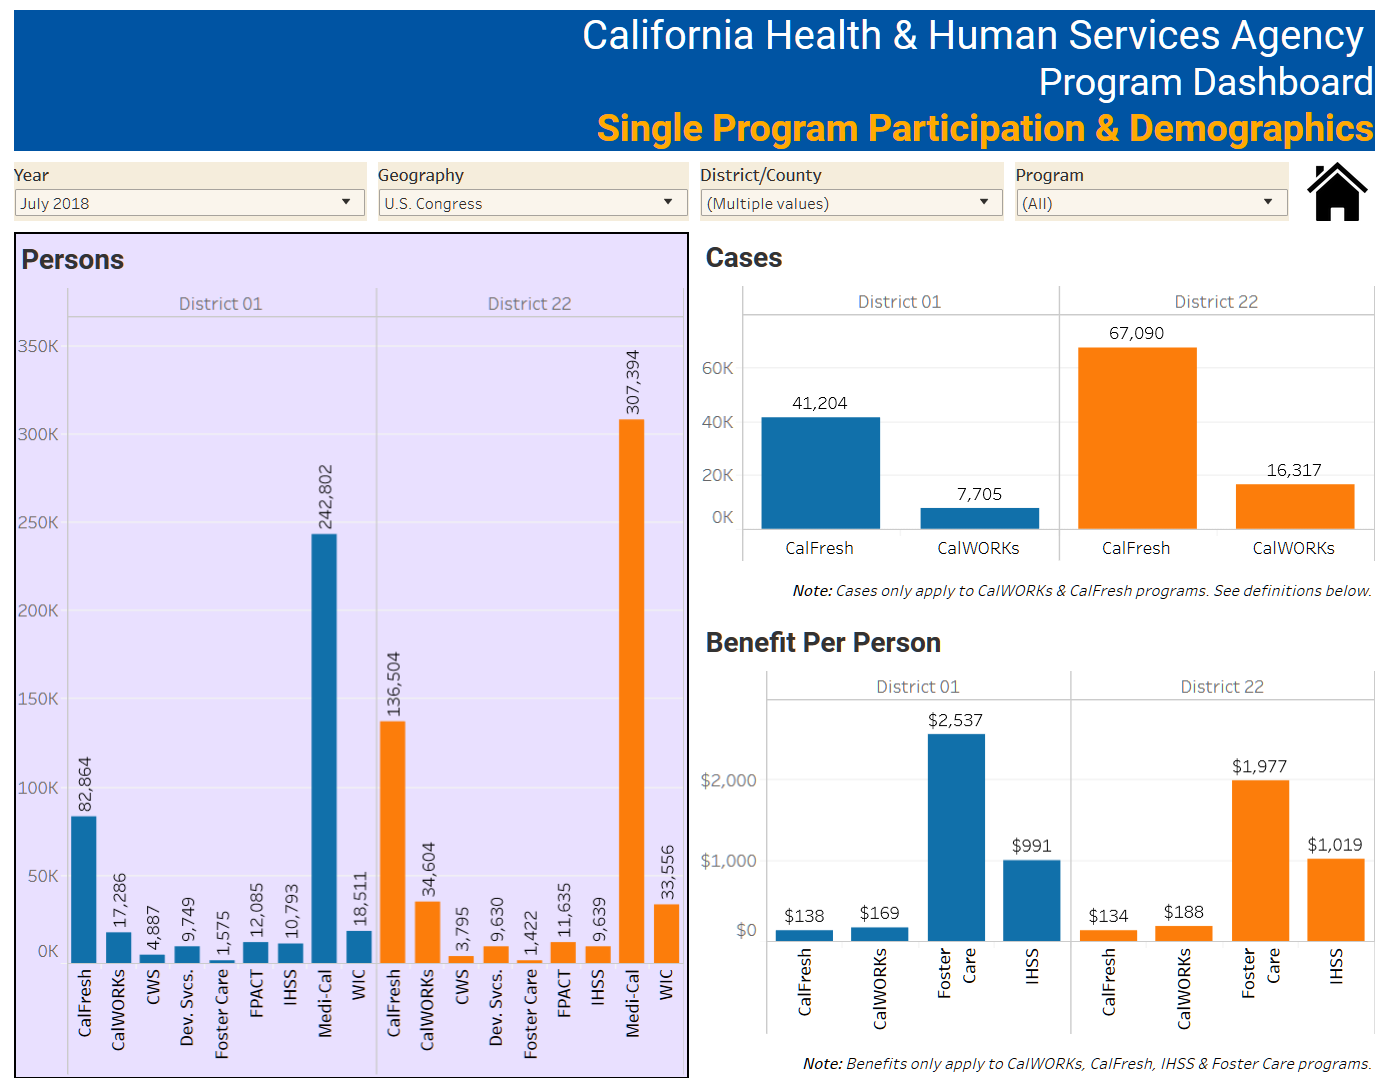 Check out the new, interactive CalHHS Program Dashboard